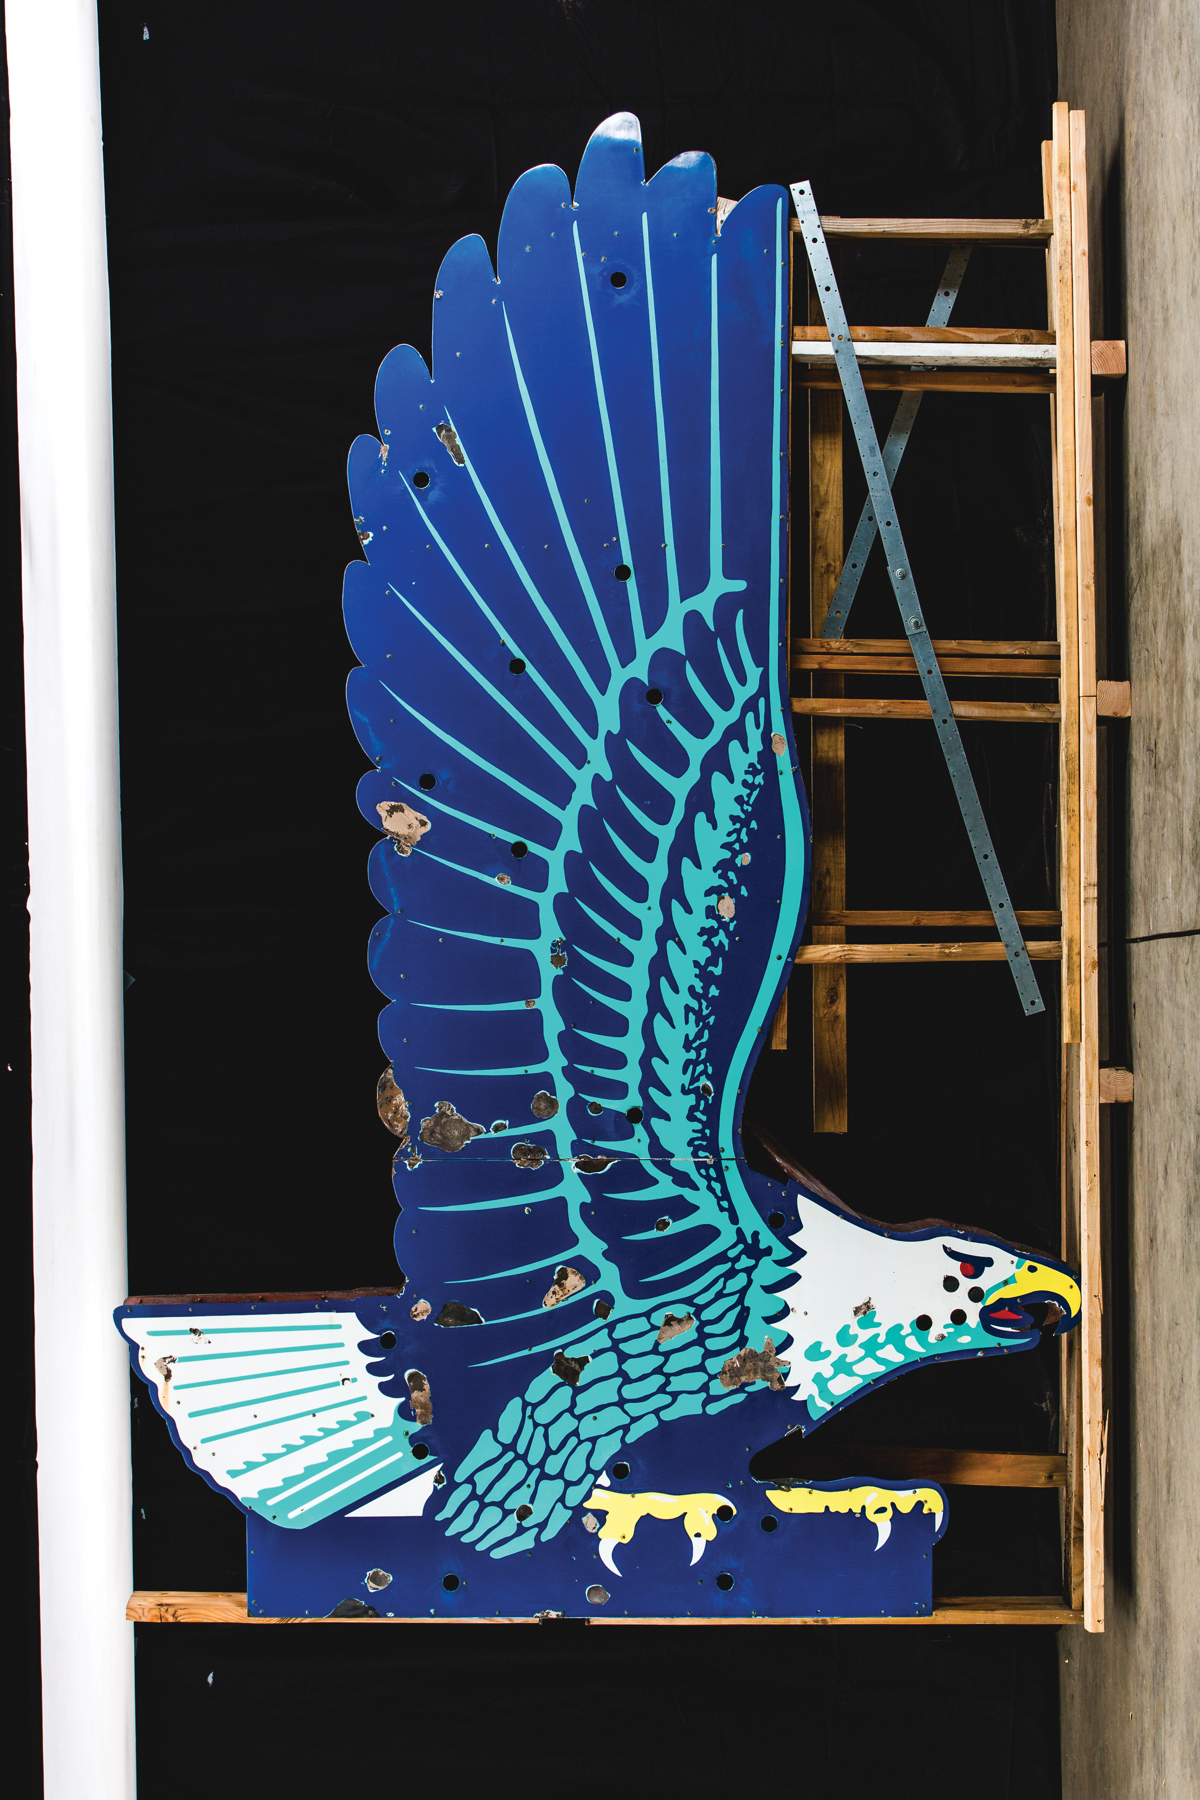 Richfield Eagle Neon Identification Signs Mounted Back-To-Back offered at RM Auctions’ Auburn Spring live auction 2019